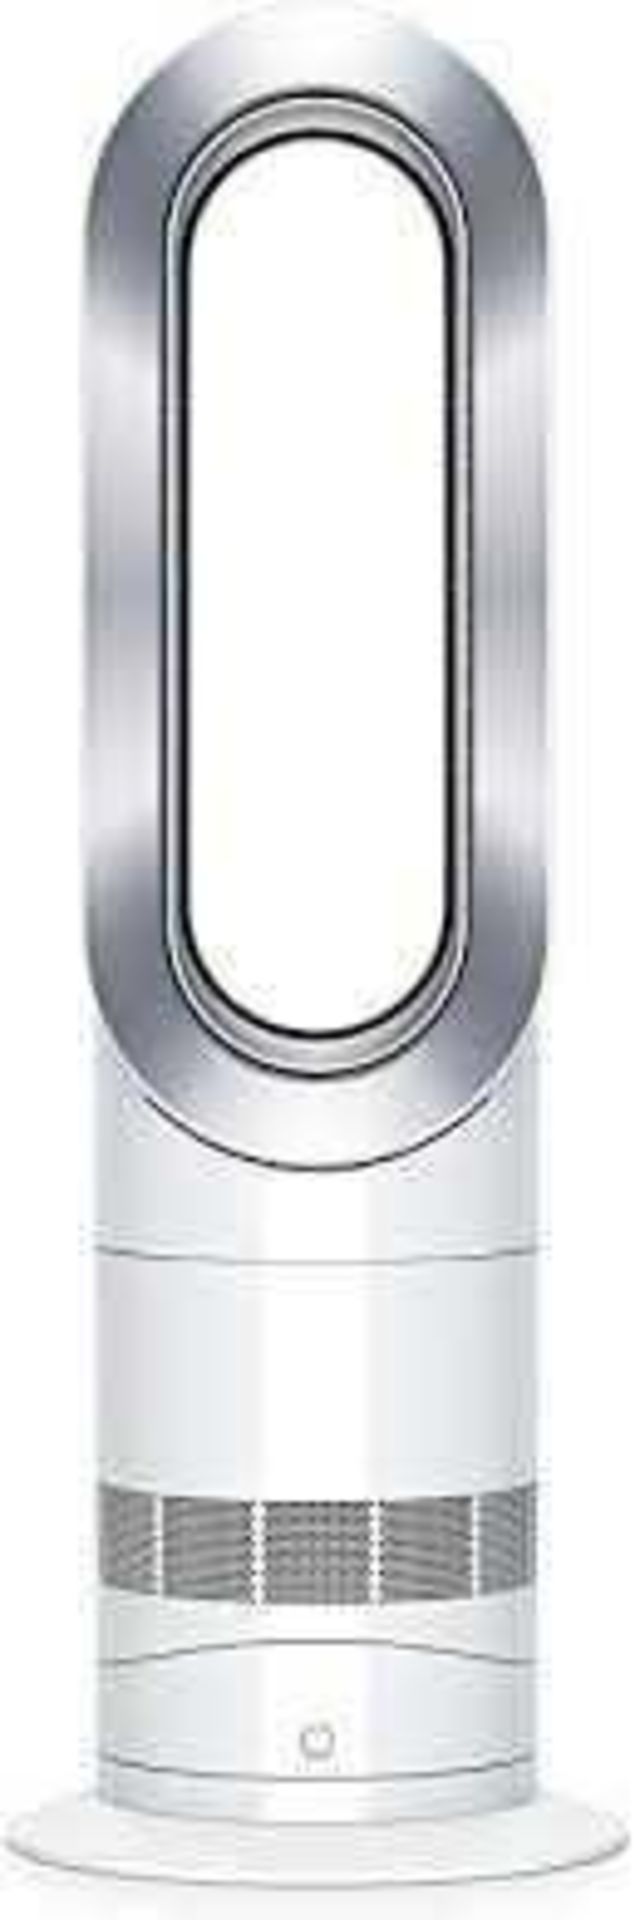 (Jb) RRP £700 Lot To Contain 1 Unpackaged Dyson Hp04 Pure Hot And Cold Bladeless Fan (01426726)